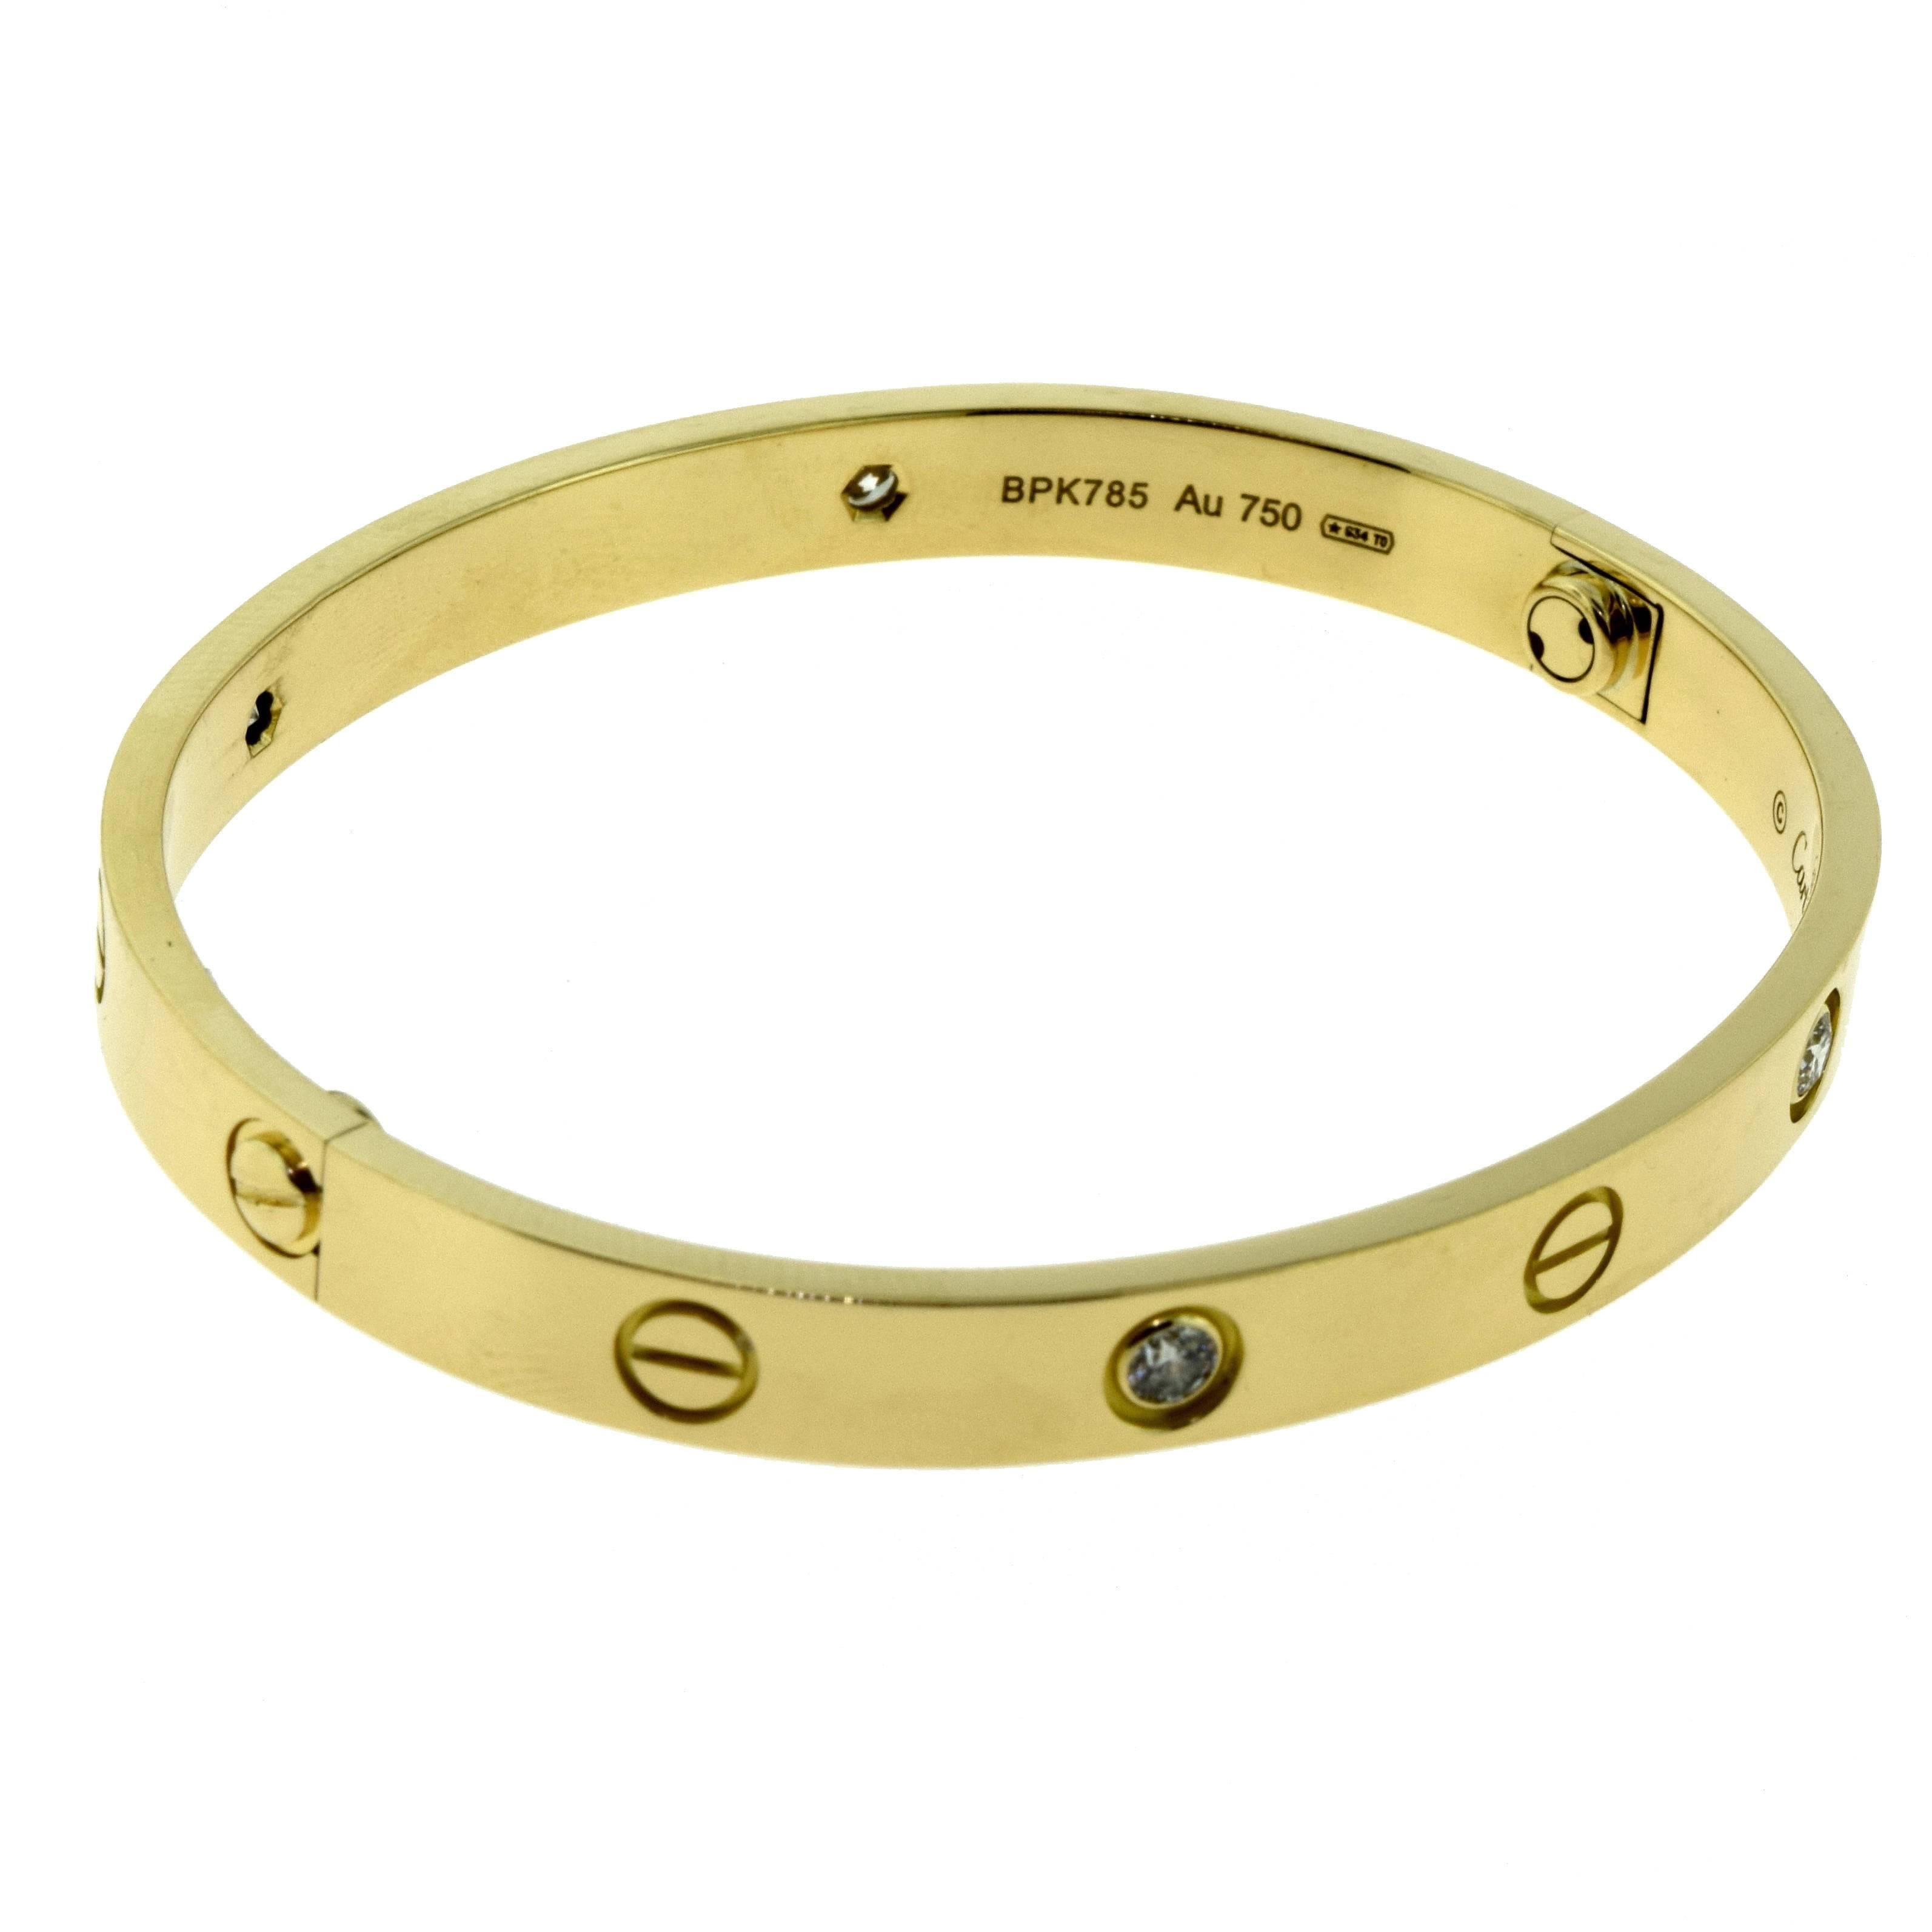 From Cartier's LOVE collection
BRACELET SIZE IS 17
Metal: 18 Karat Yellow Gold
Stones: 4 Round Brilliant Cut Diamonds
Total Carat Weight: 0.42 ct
Hallmark: Cartier 750 Serial No. 17​​​​​​​

Retail is $10,100.00